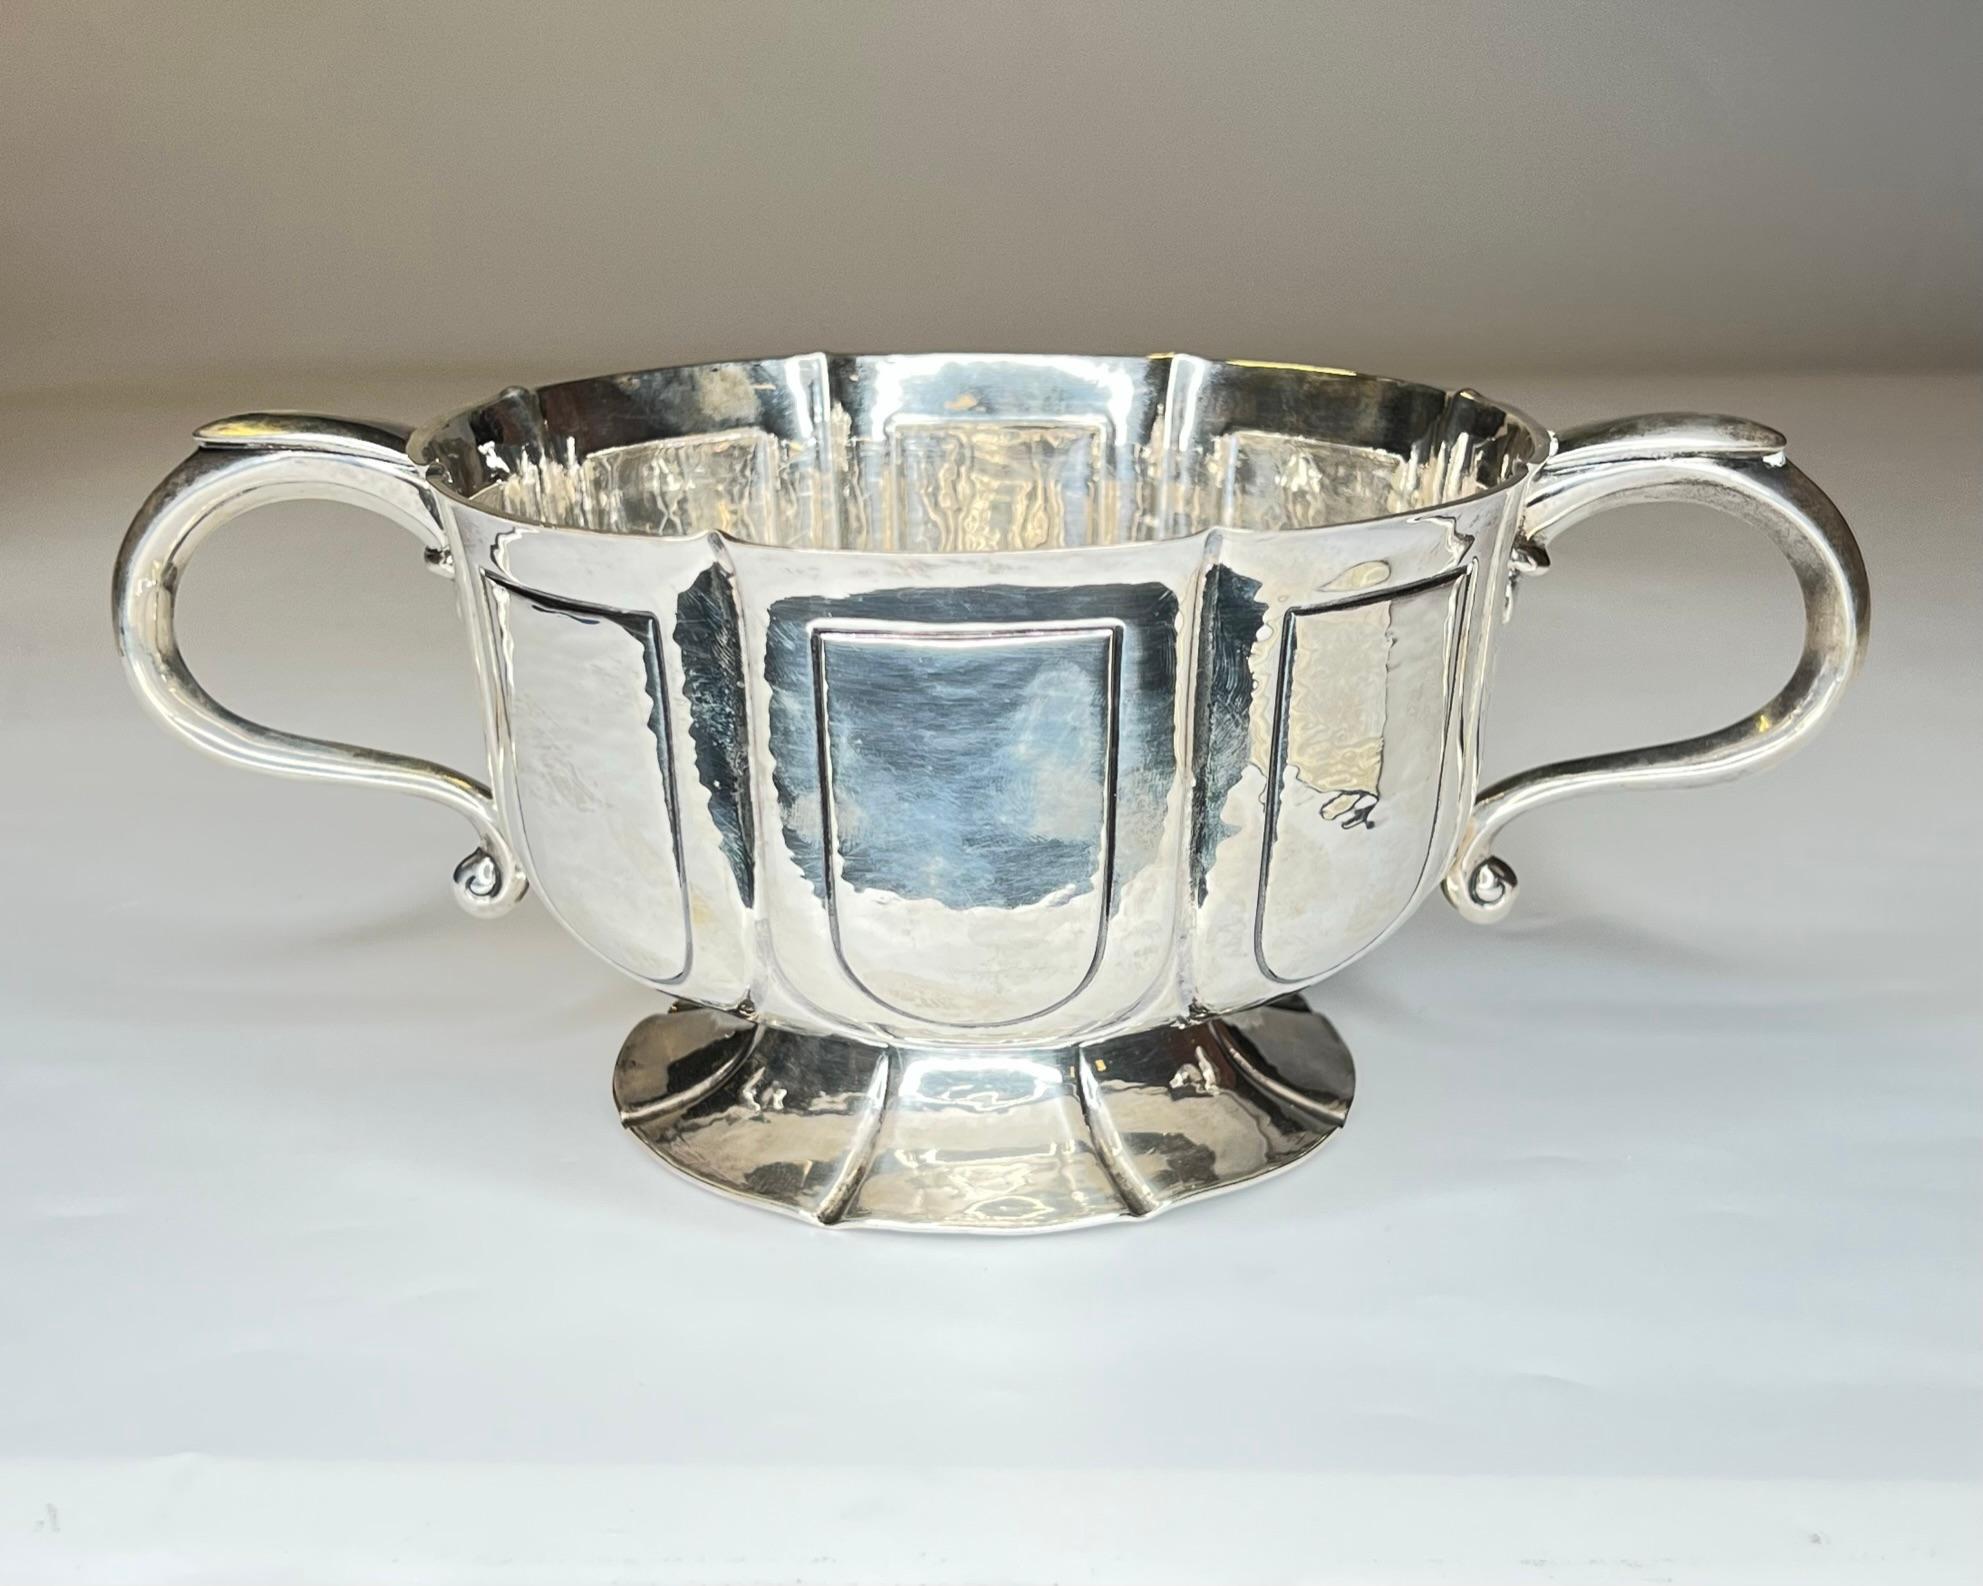 Our charming sterling silver handled bowl by the London master, William Comyns, dates to 1907 and is in very good condition. 24.4 oz, 694 g. An exceptional example of Edwardian period sterling.